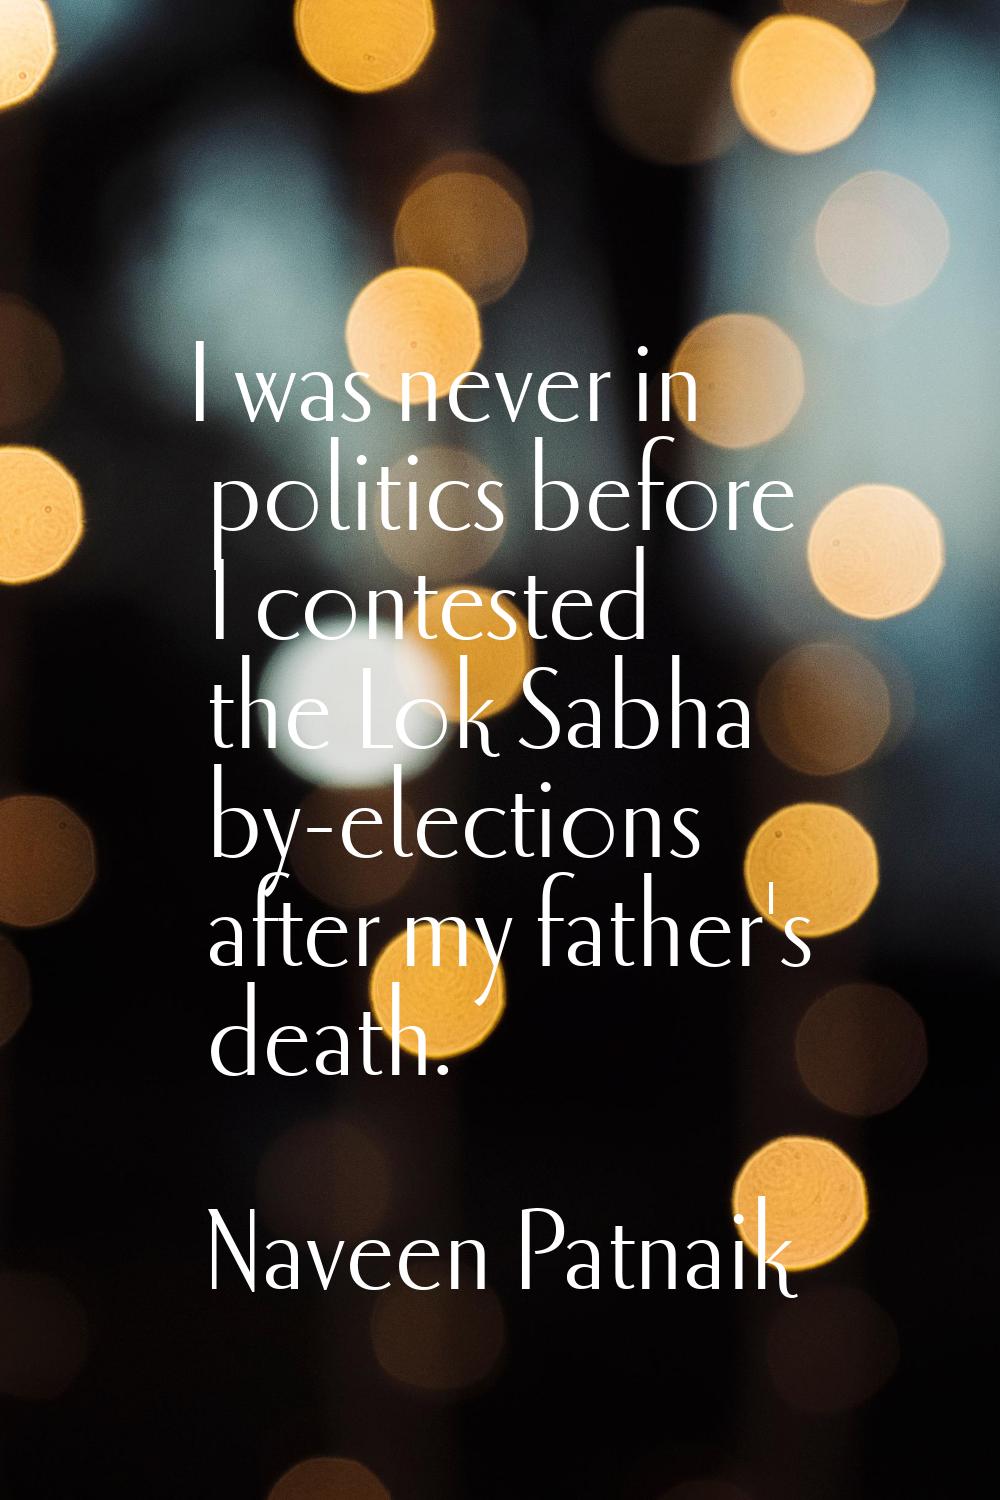 I was never in politics before I contested the Lok Sabha by-elections after my father's death.